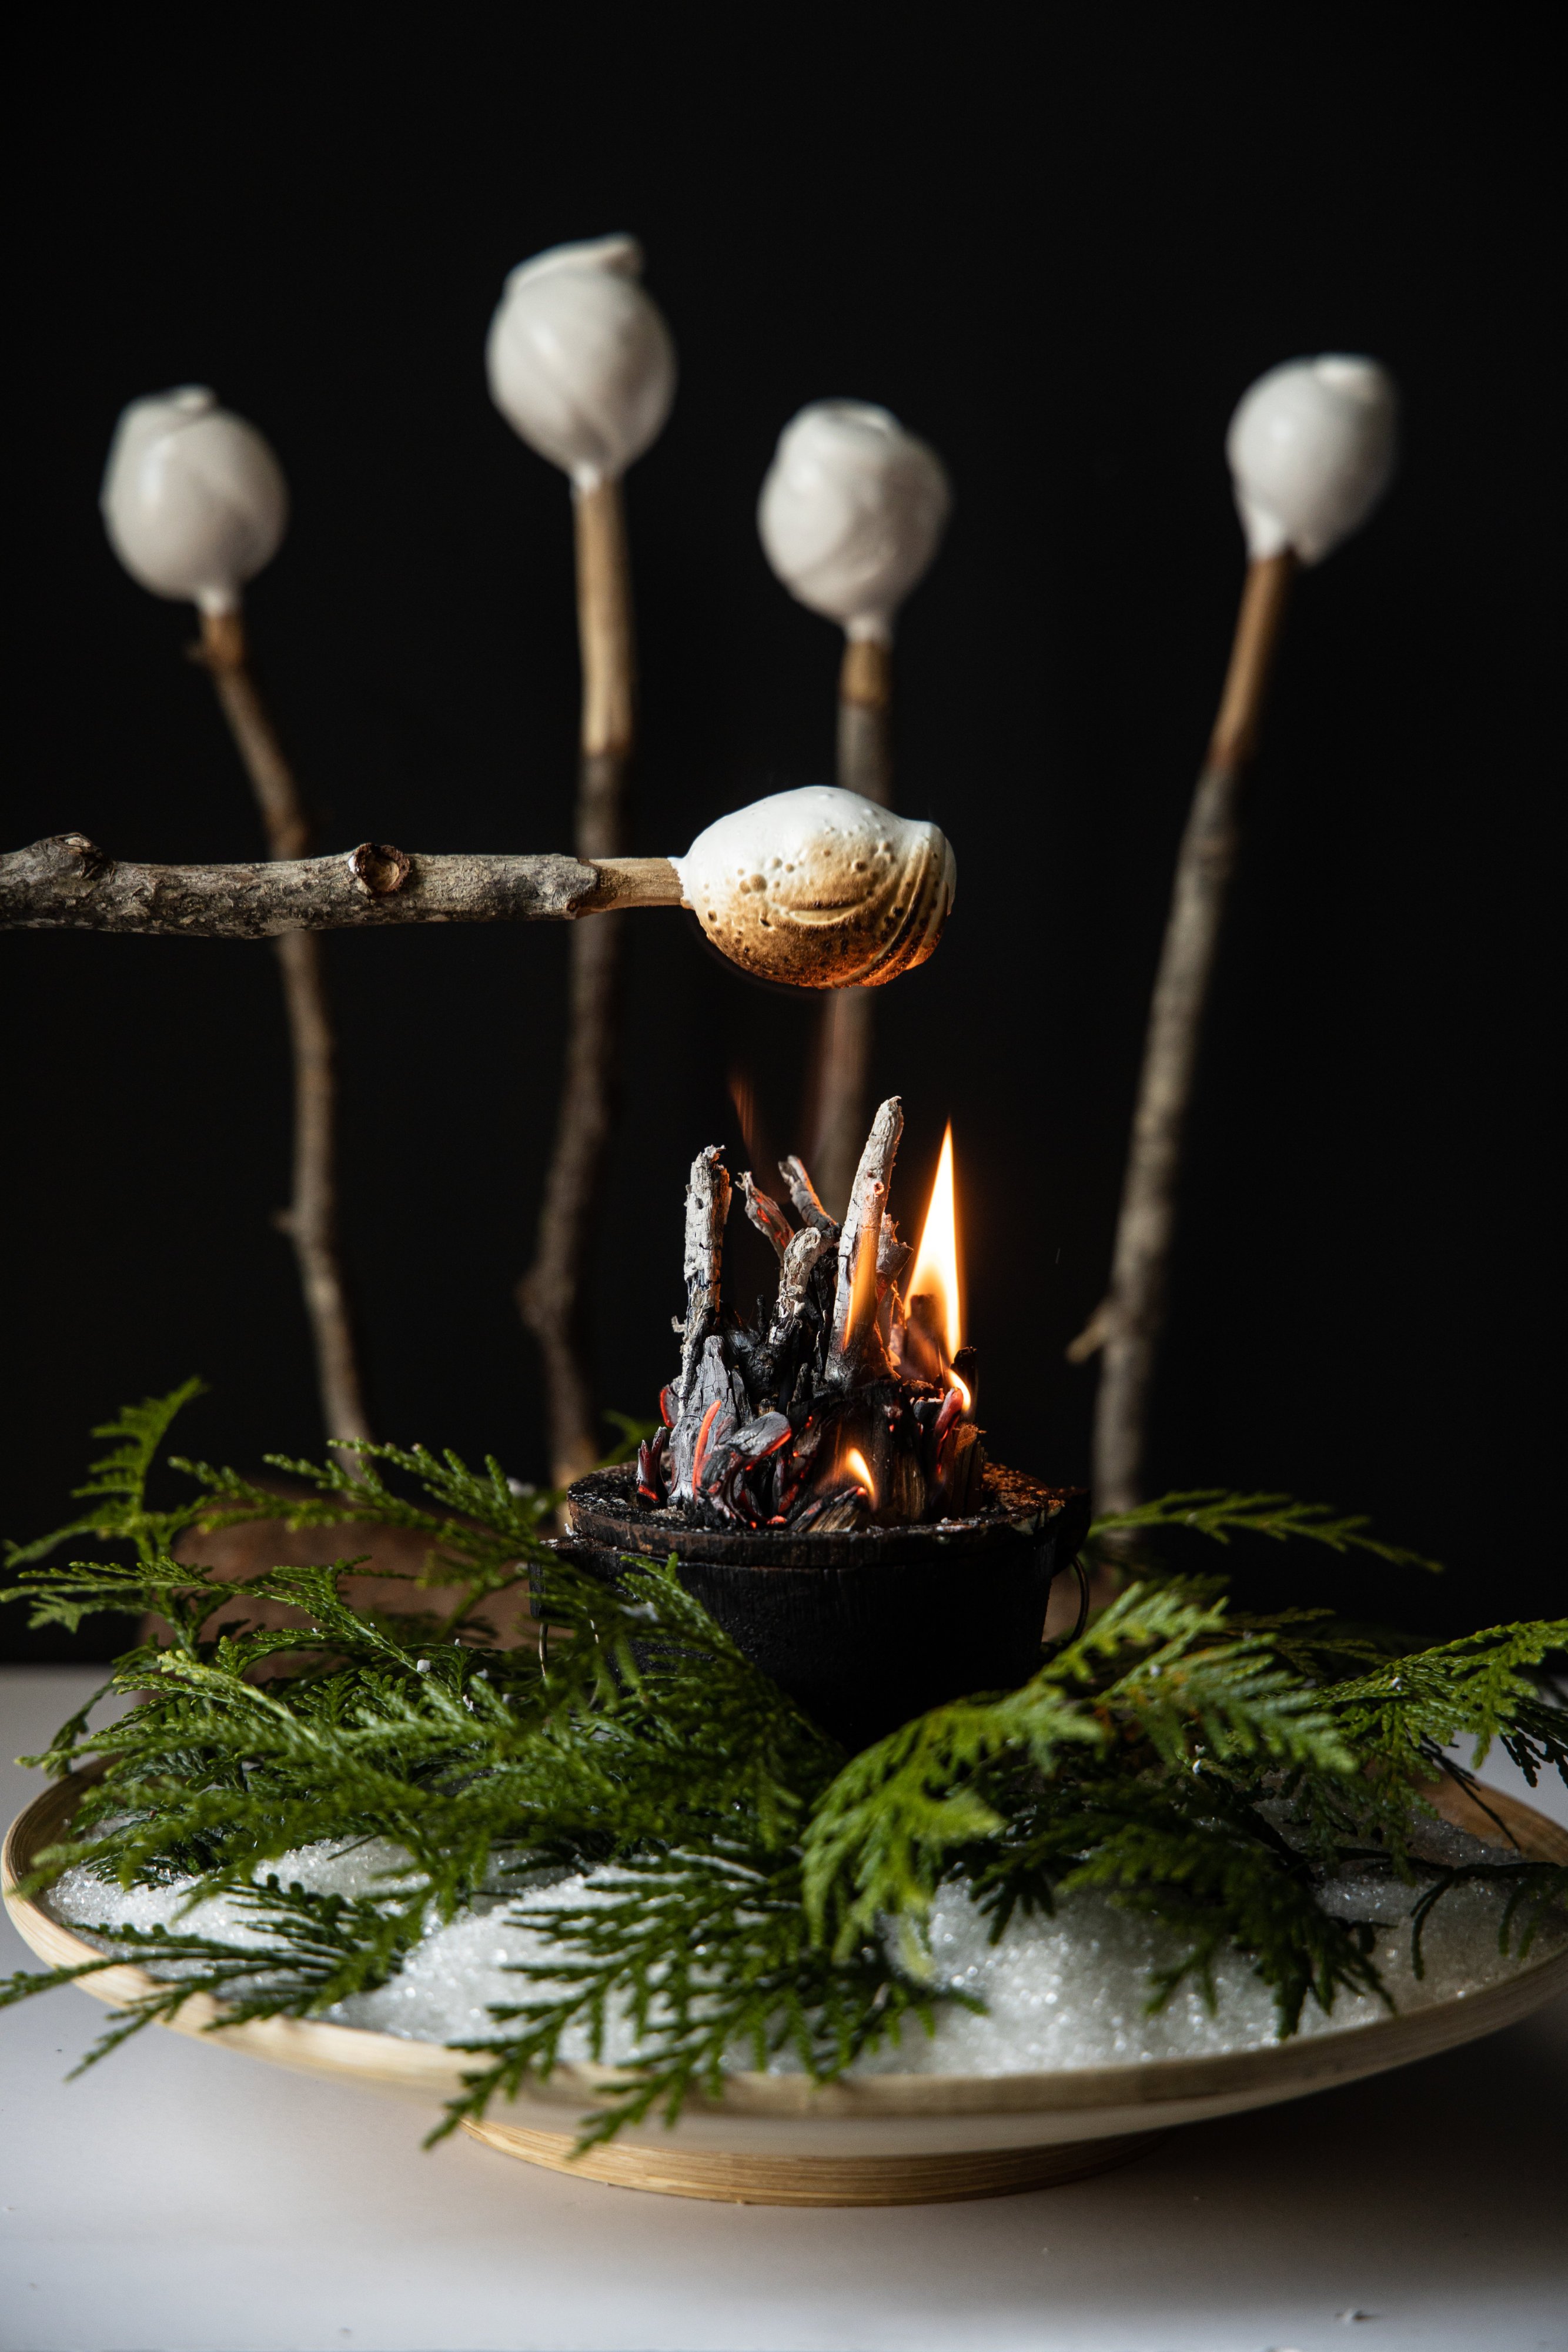 Guests can roast vanilla marshmallows over a flame at their table. Photo by Jennifer Chase.